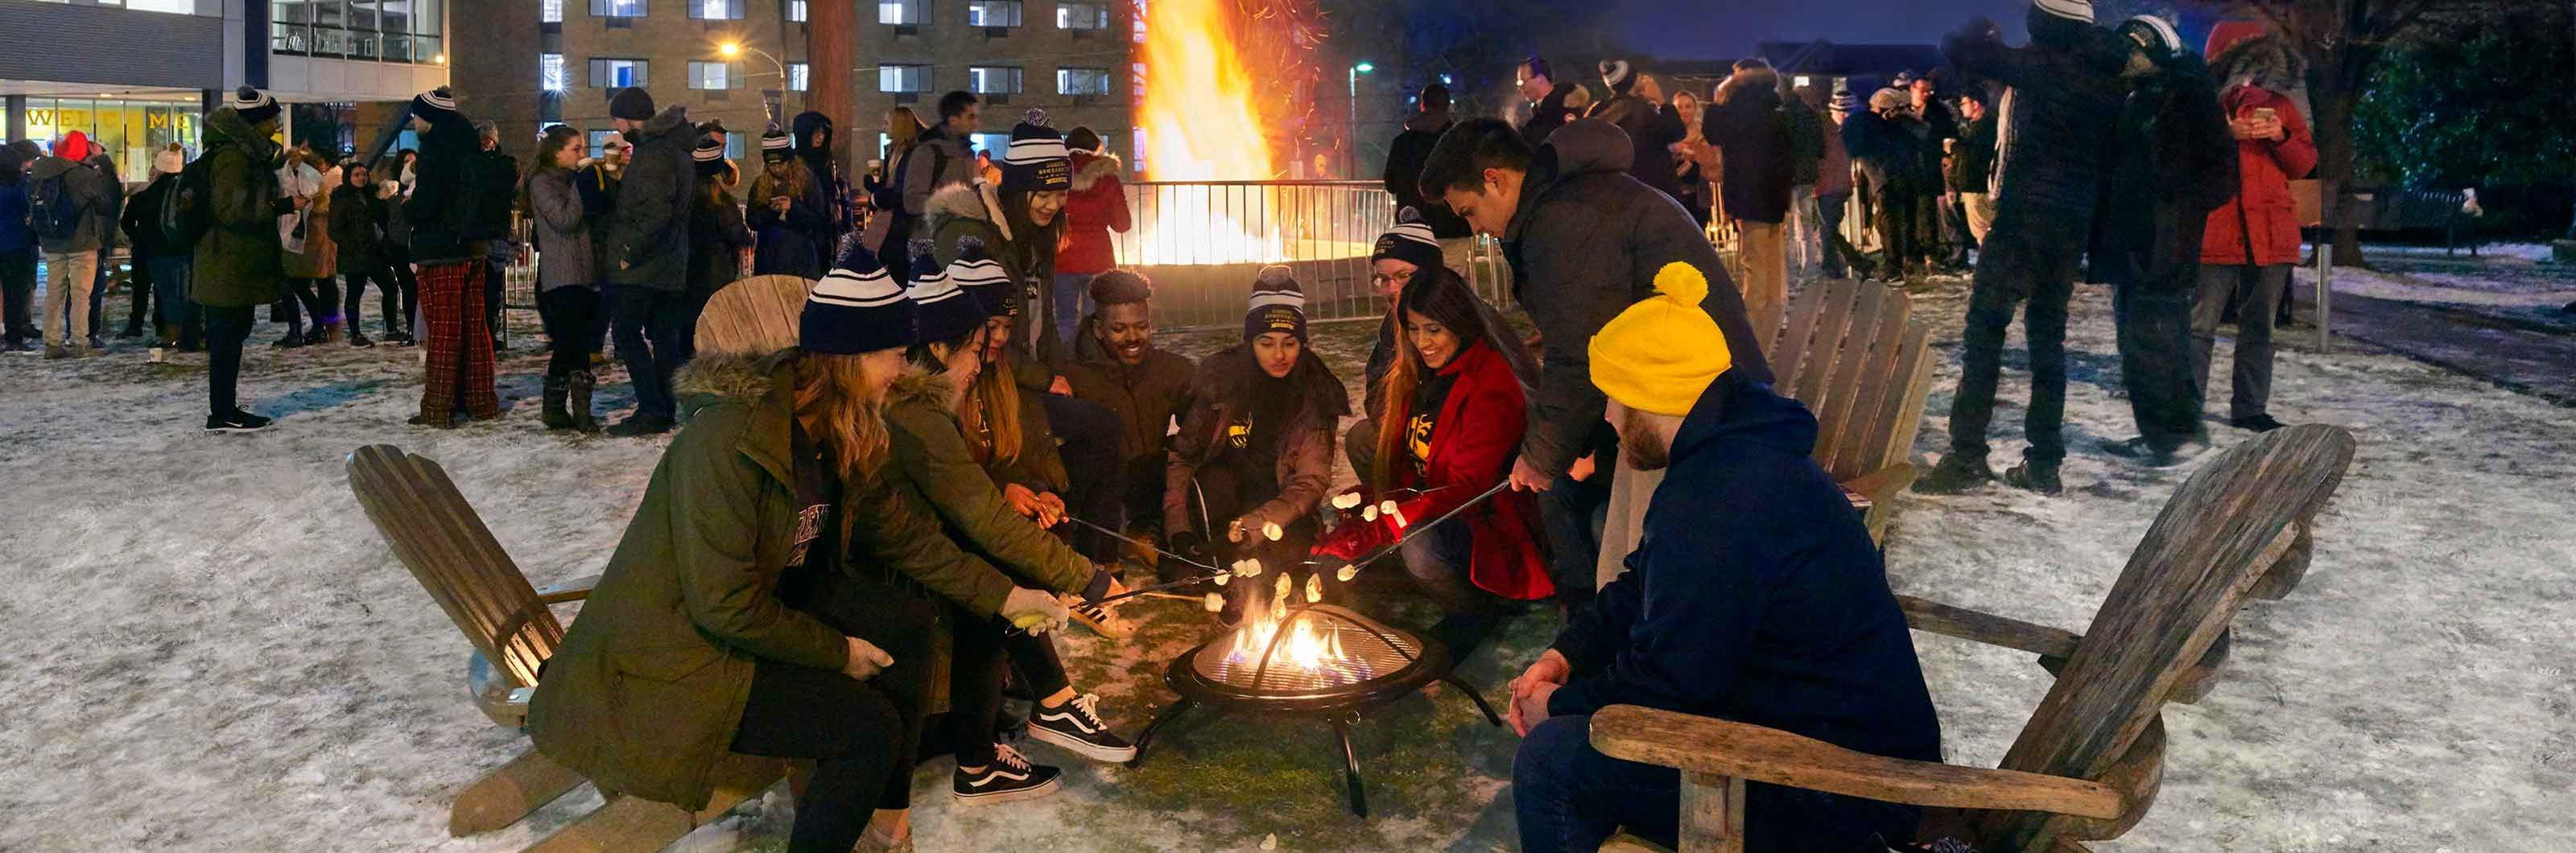 students around a bonfire on campus